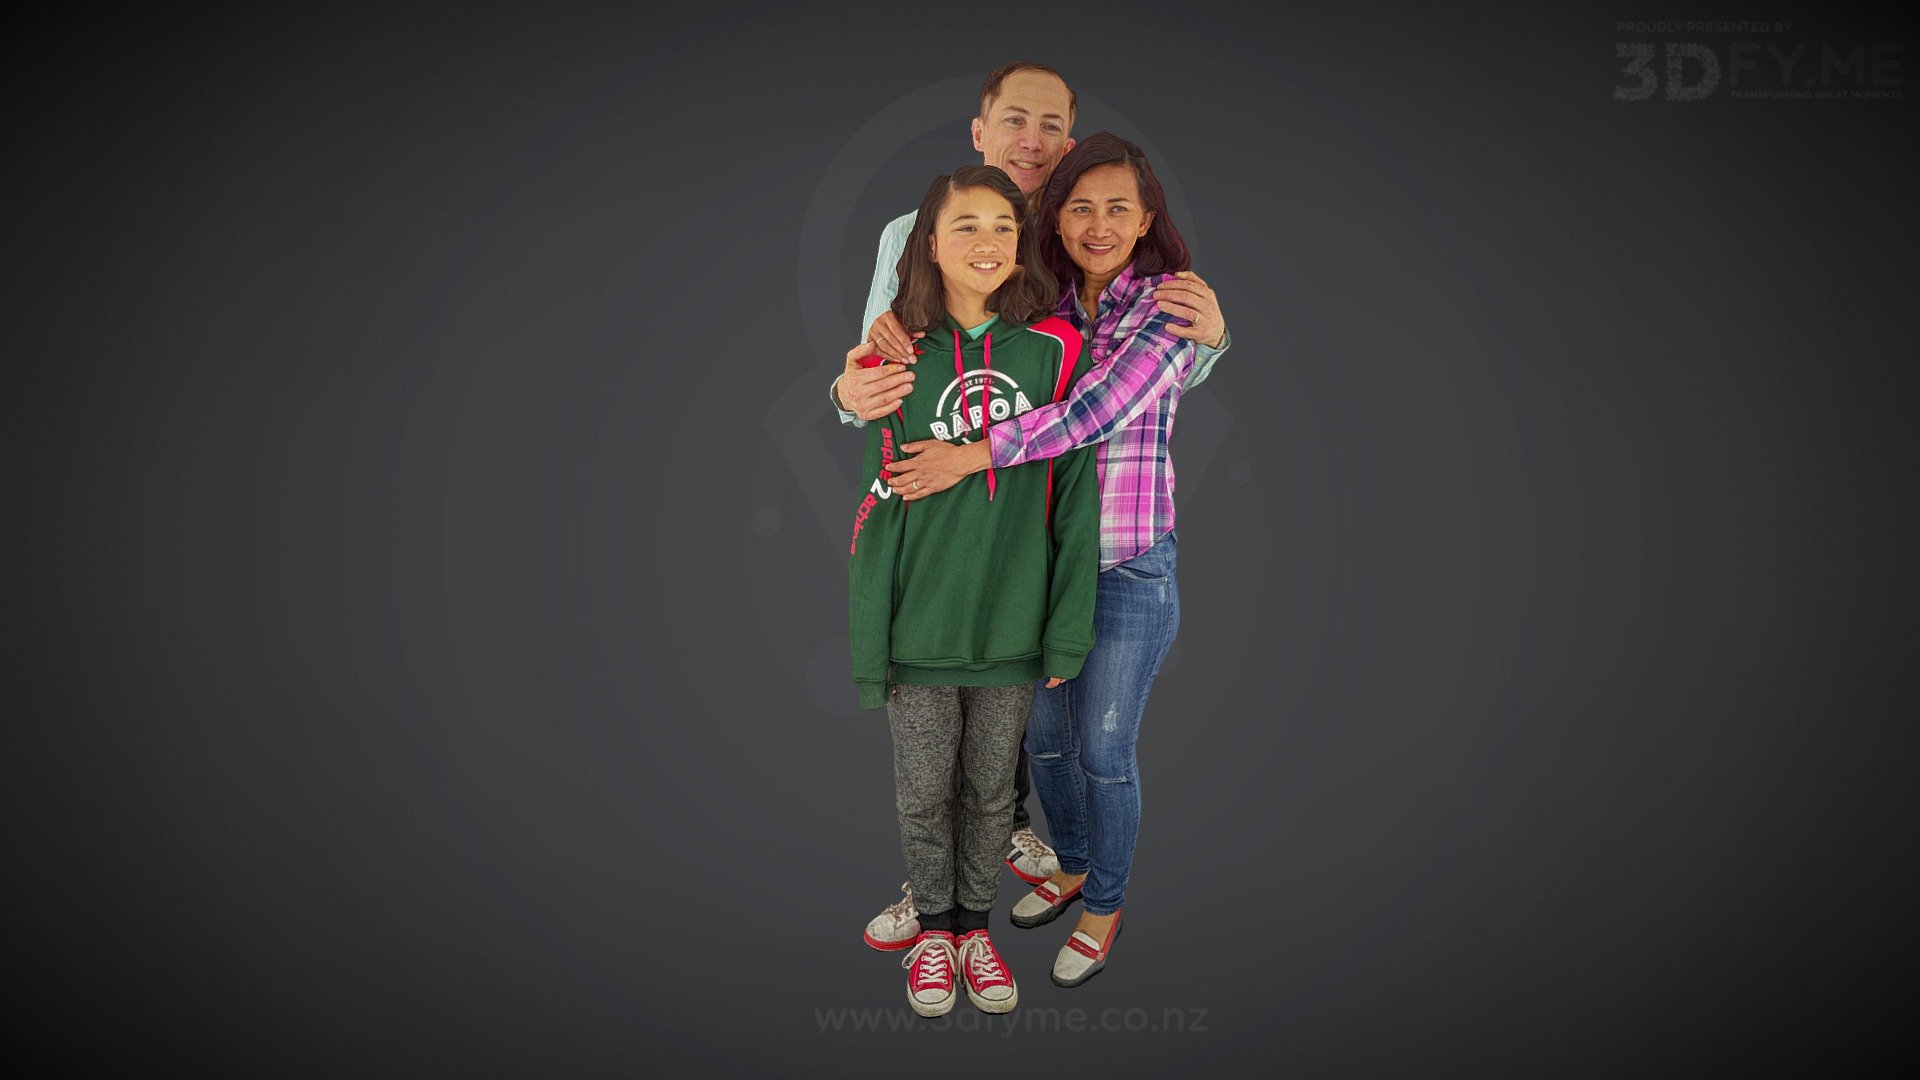 Photogrammetry Scan, 138 pics (Raspberry Pi, 8 MP), decimated mesh, texture re-projected (raw diffuse map, 8k) - Happy Family :) - 3D model by 3Dfy.me New Zealand (@smacher2016) 3d model